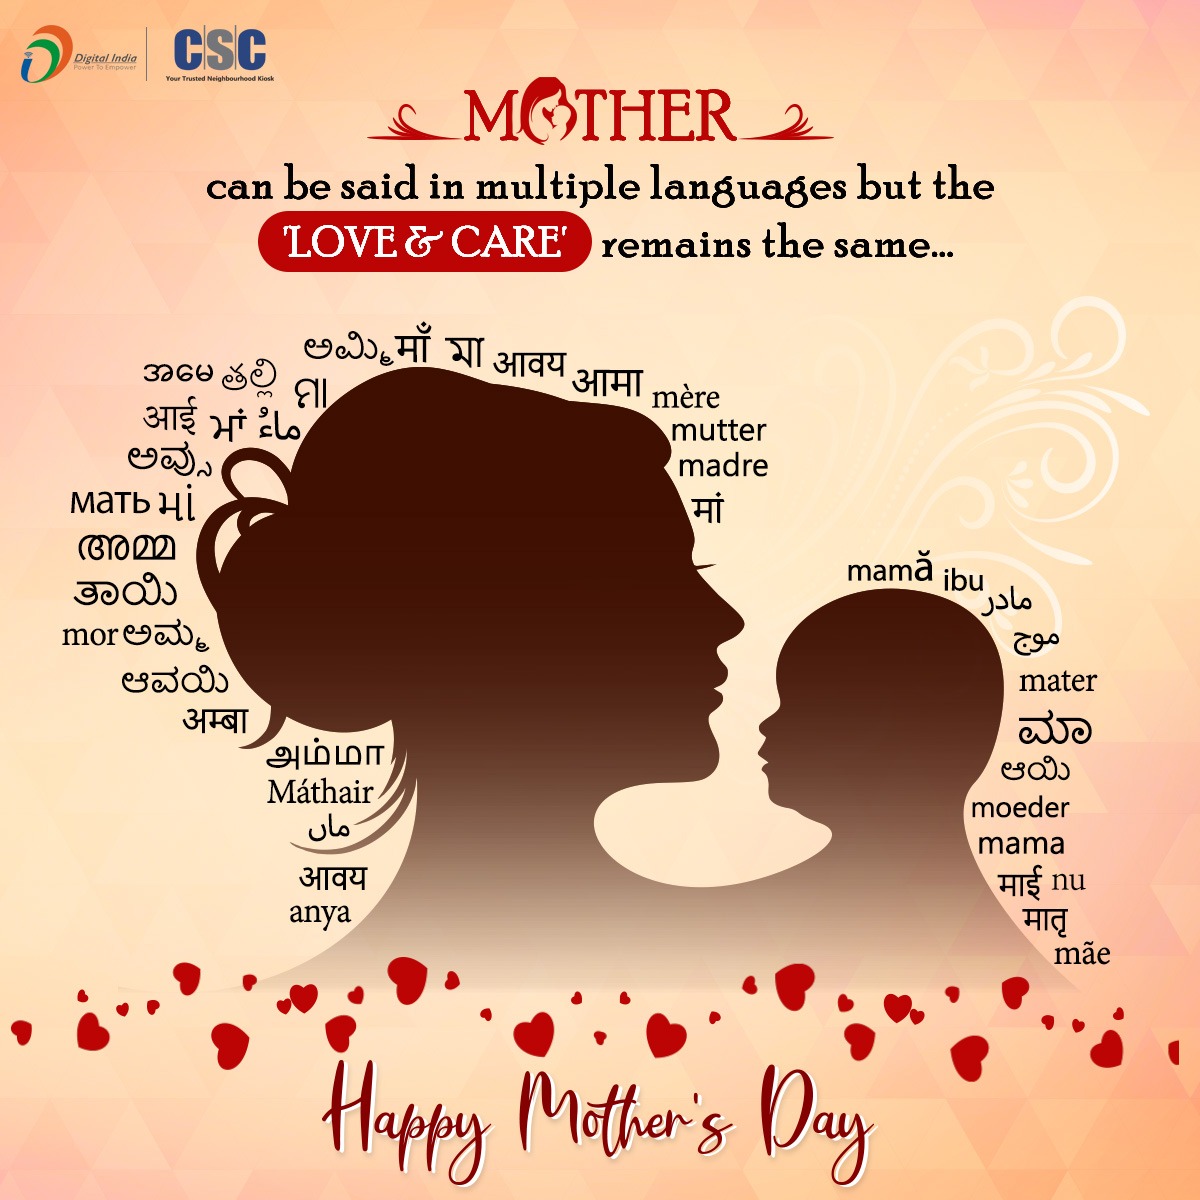 MOTHER can be said in multiple languages but the 'LOVE & CARE' remains the same...

#CSC wishes you all a Happy Mother's Day!!

#DigitalIndia #MothersDay #MothersDay2024 #HappyMothersDay #HappyMothersDay2024 #Mothers #DigitalInclusion #Mom